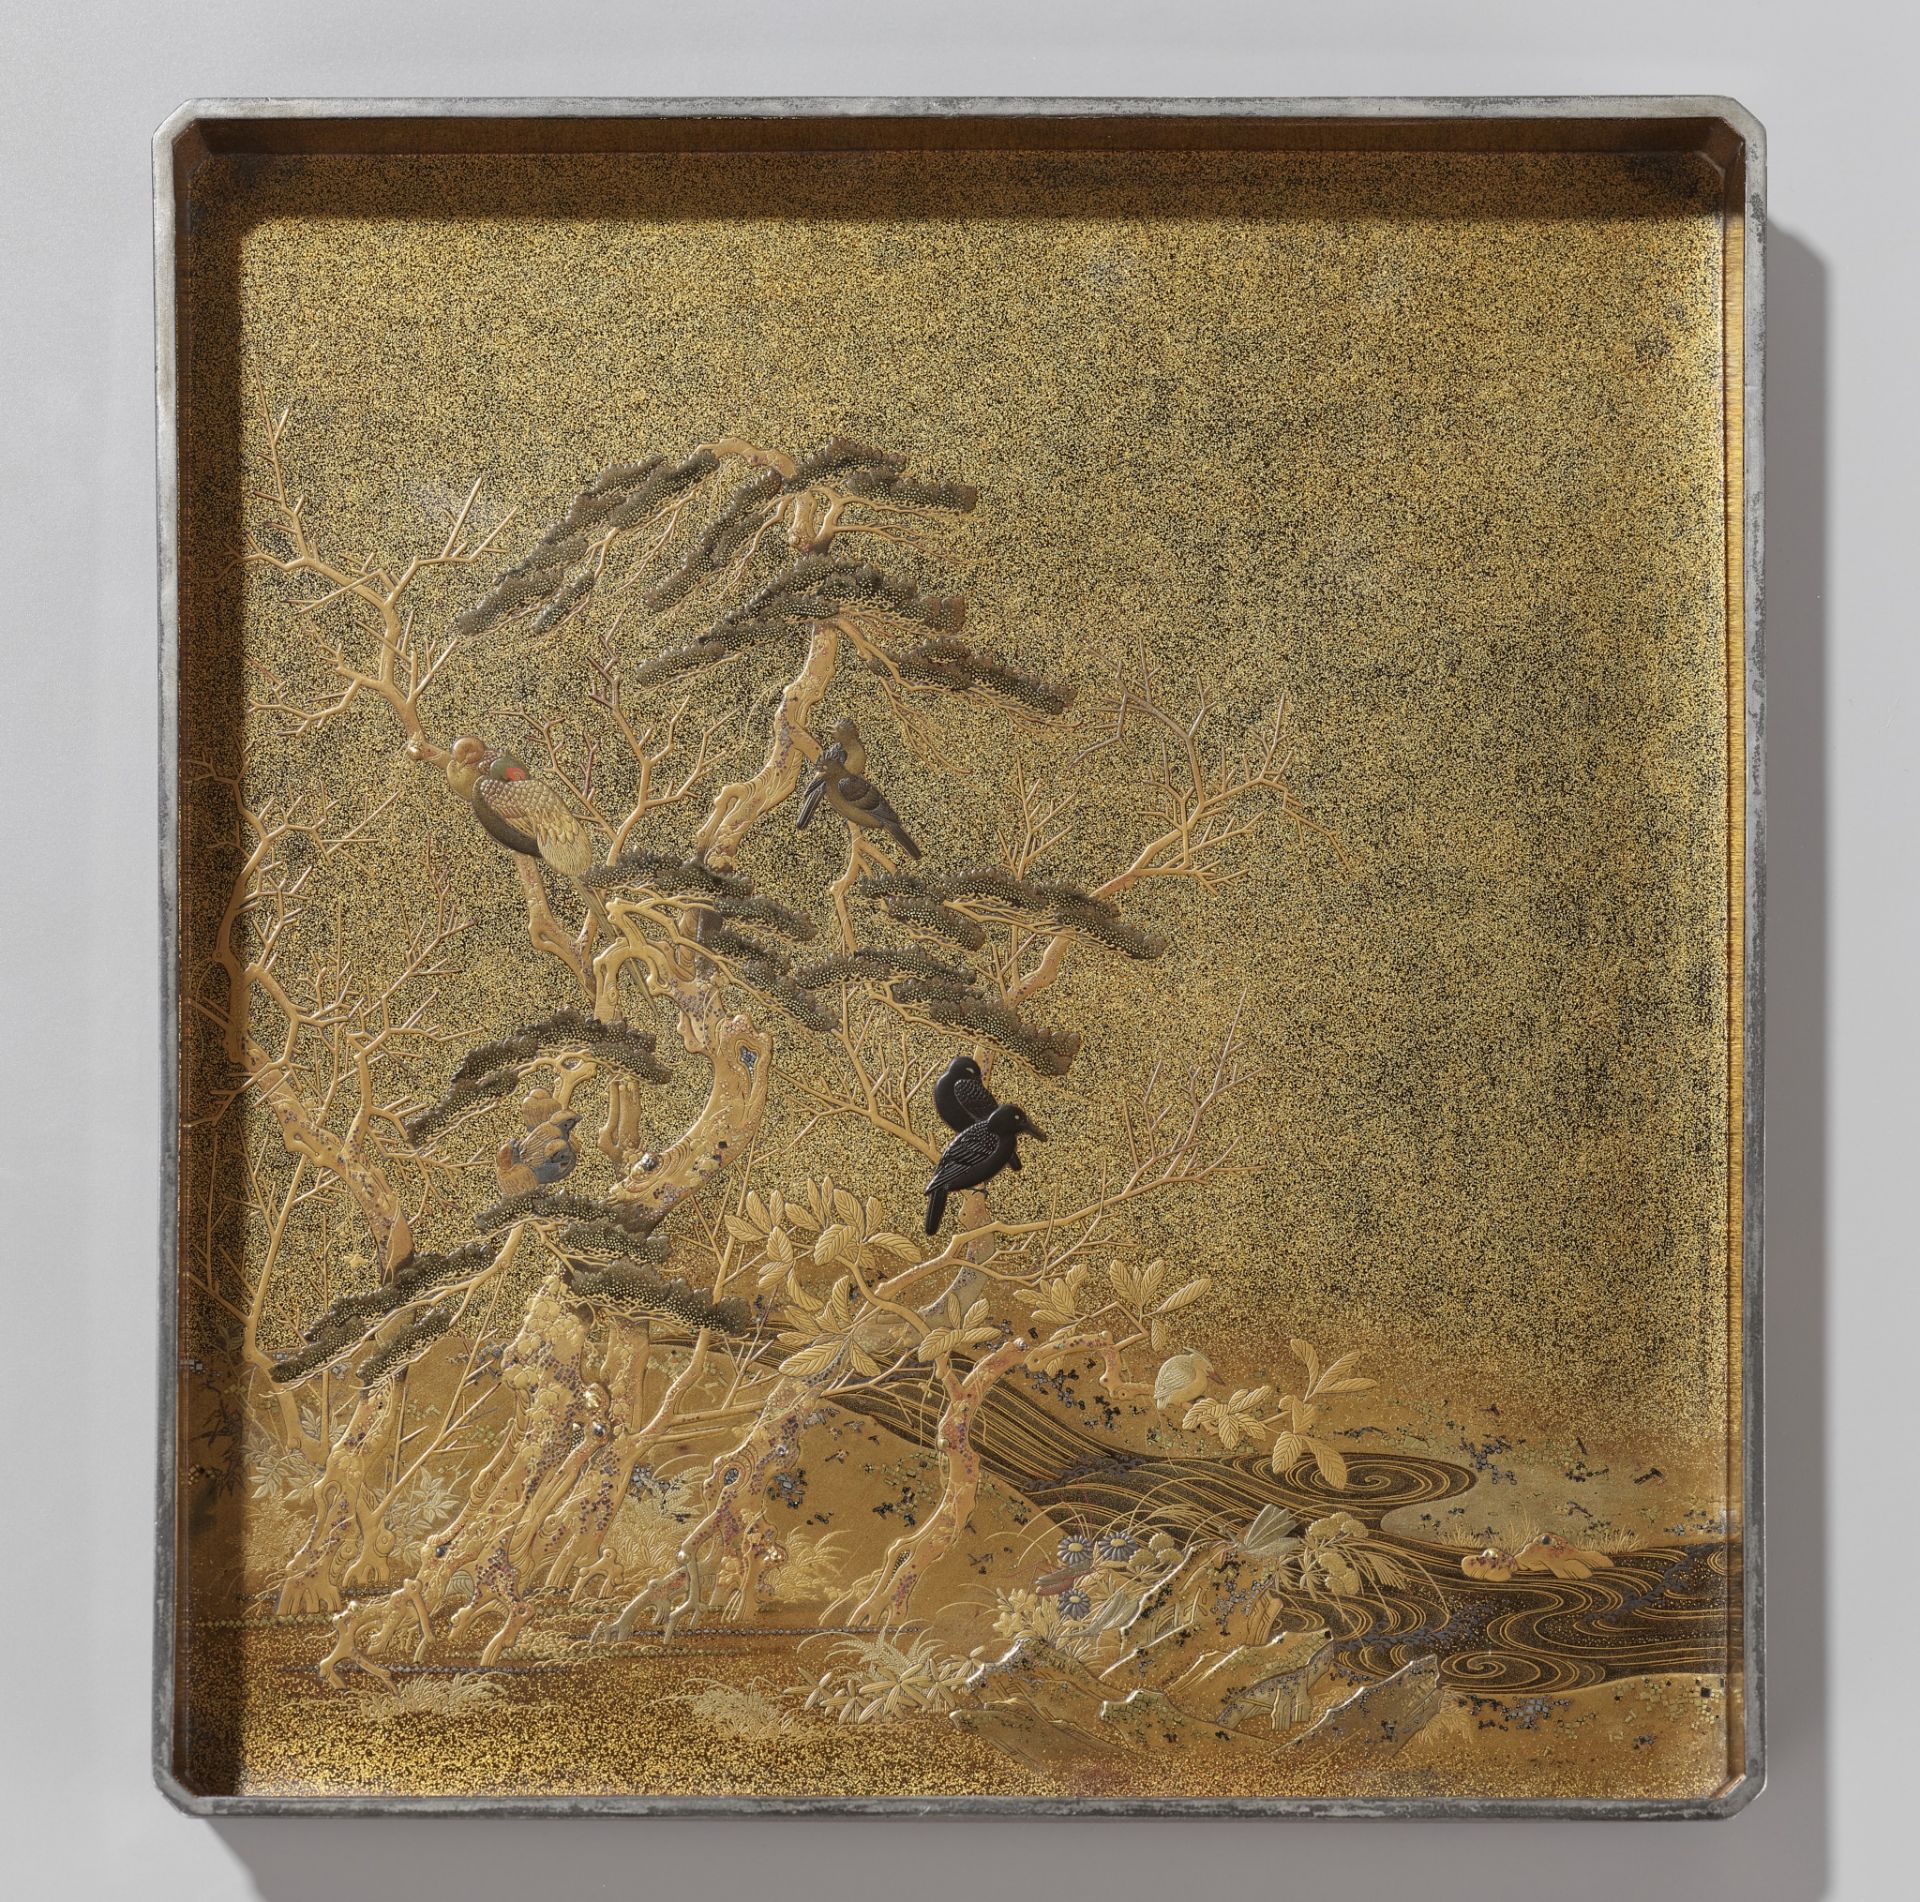 A SUPERB LACQUER SUZURIBAKO (WRITING BOX) DEPICTING A MOONLIT FOREST - Image 3 of 15